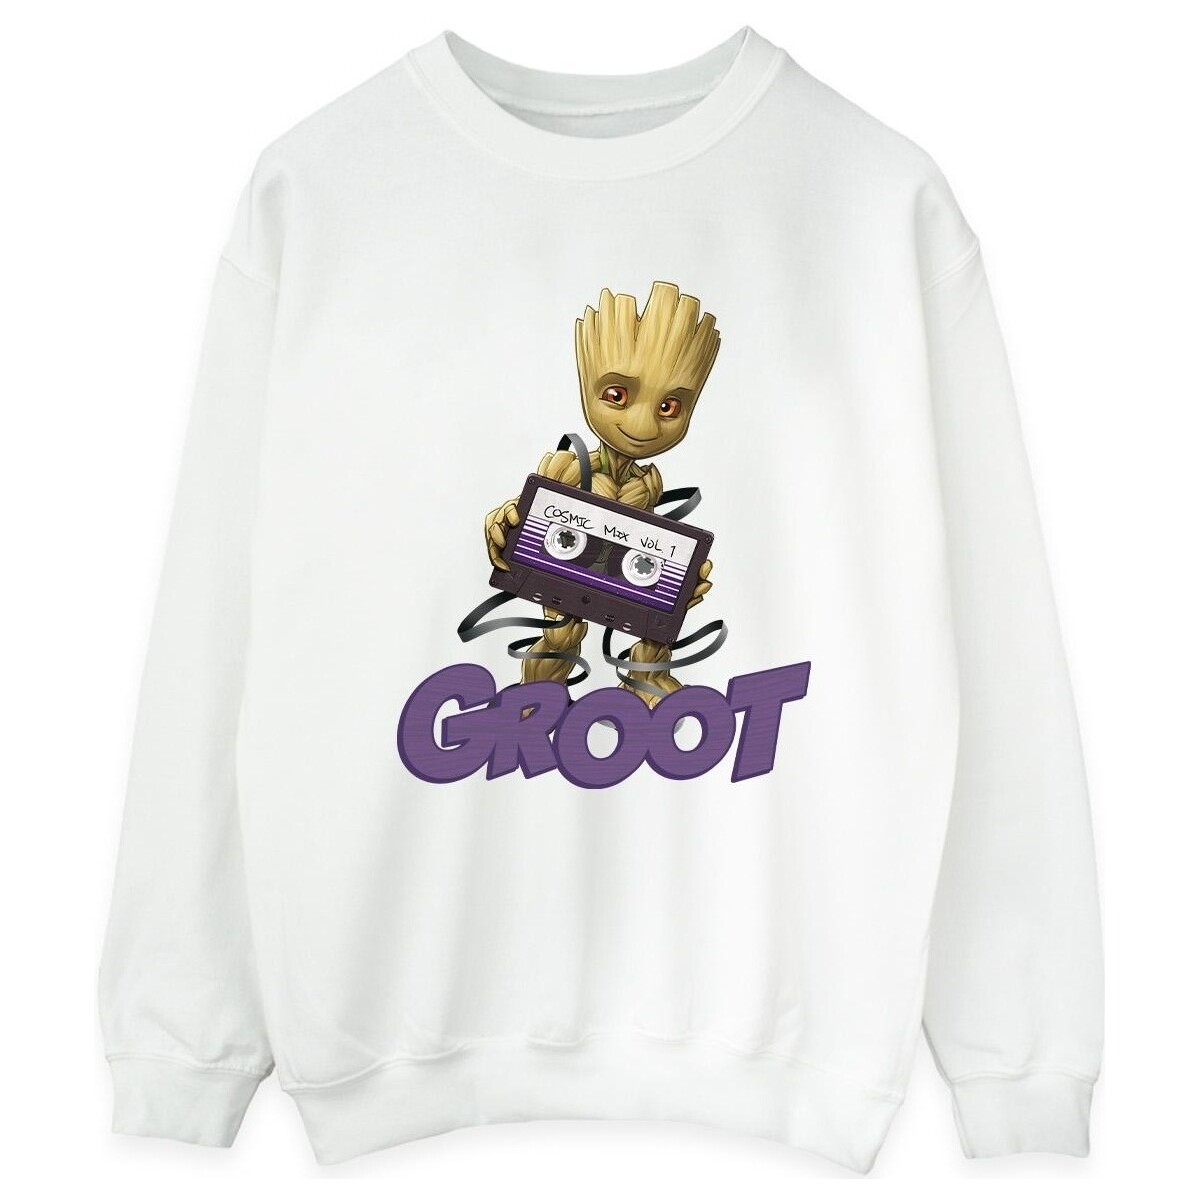 textil Mujer Sudaderas Guardians Of The Galaxy Groot Casette Blanco